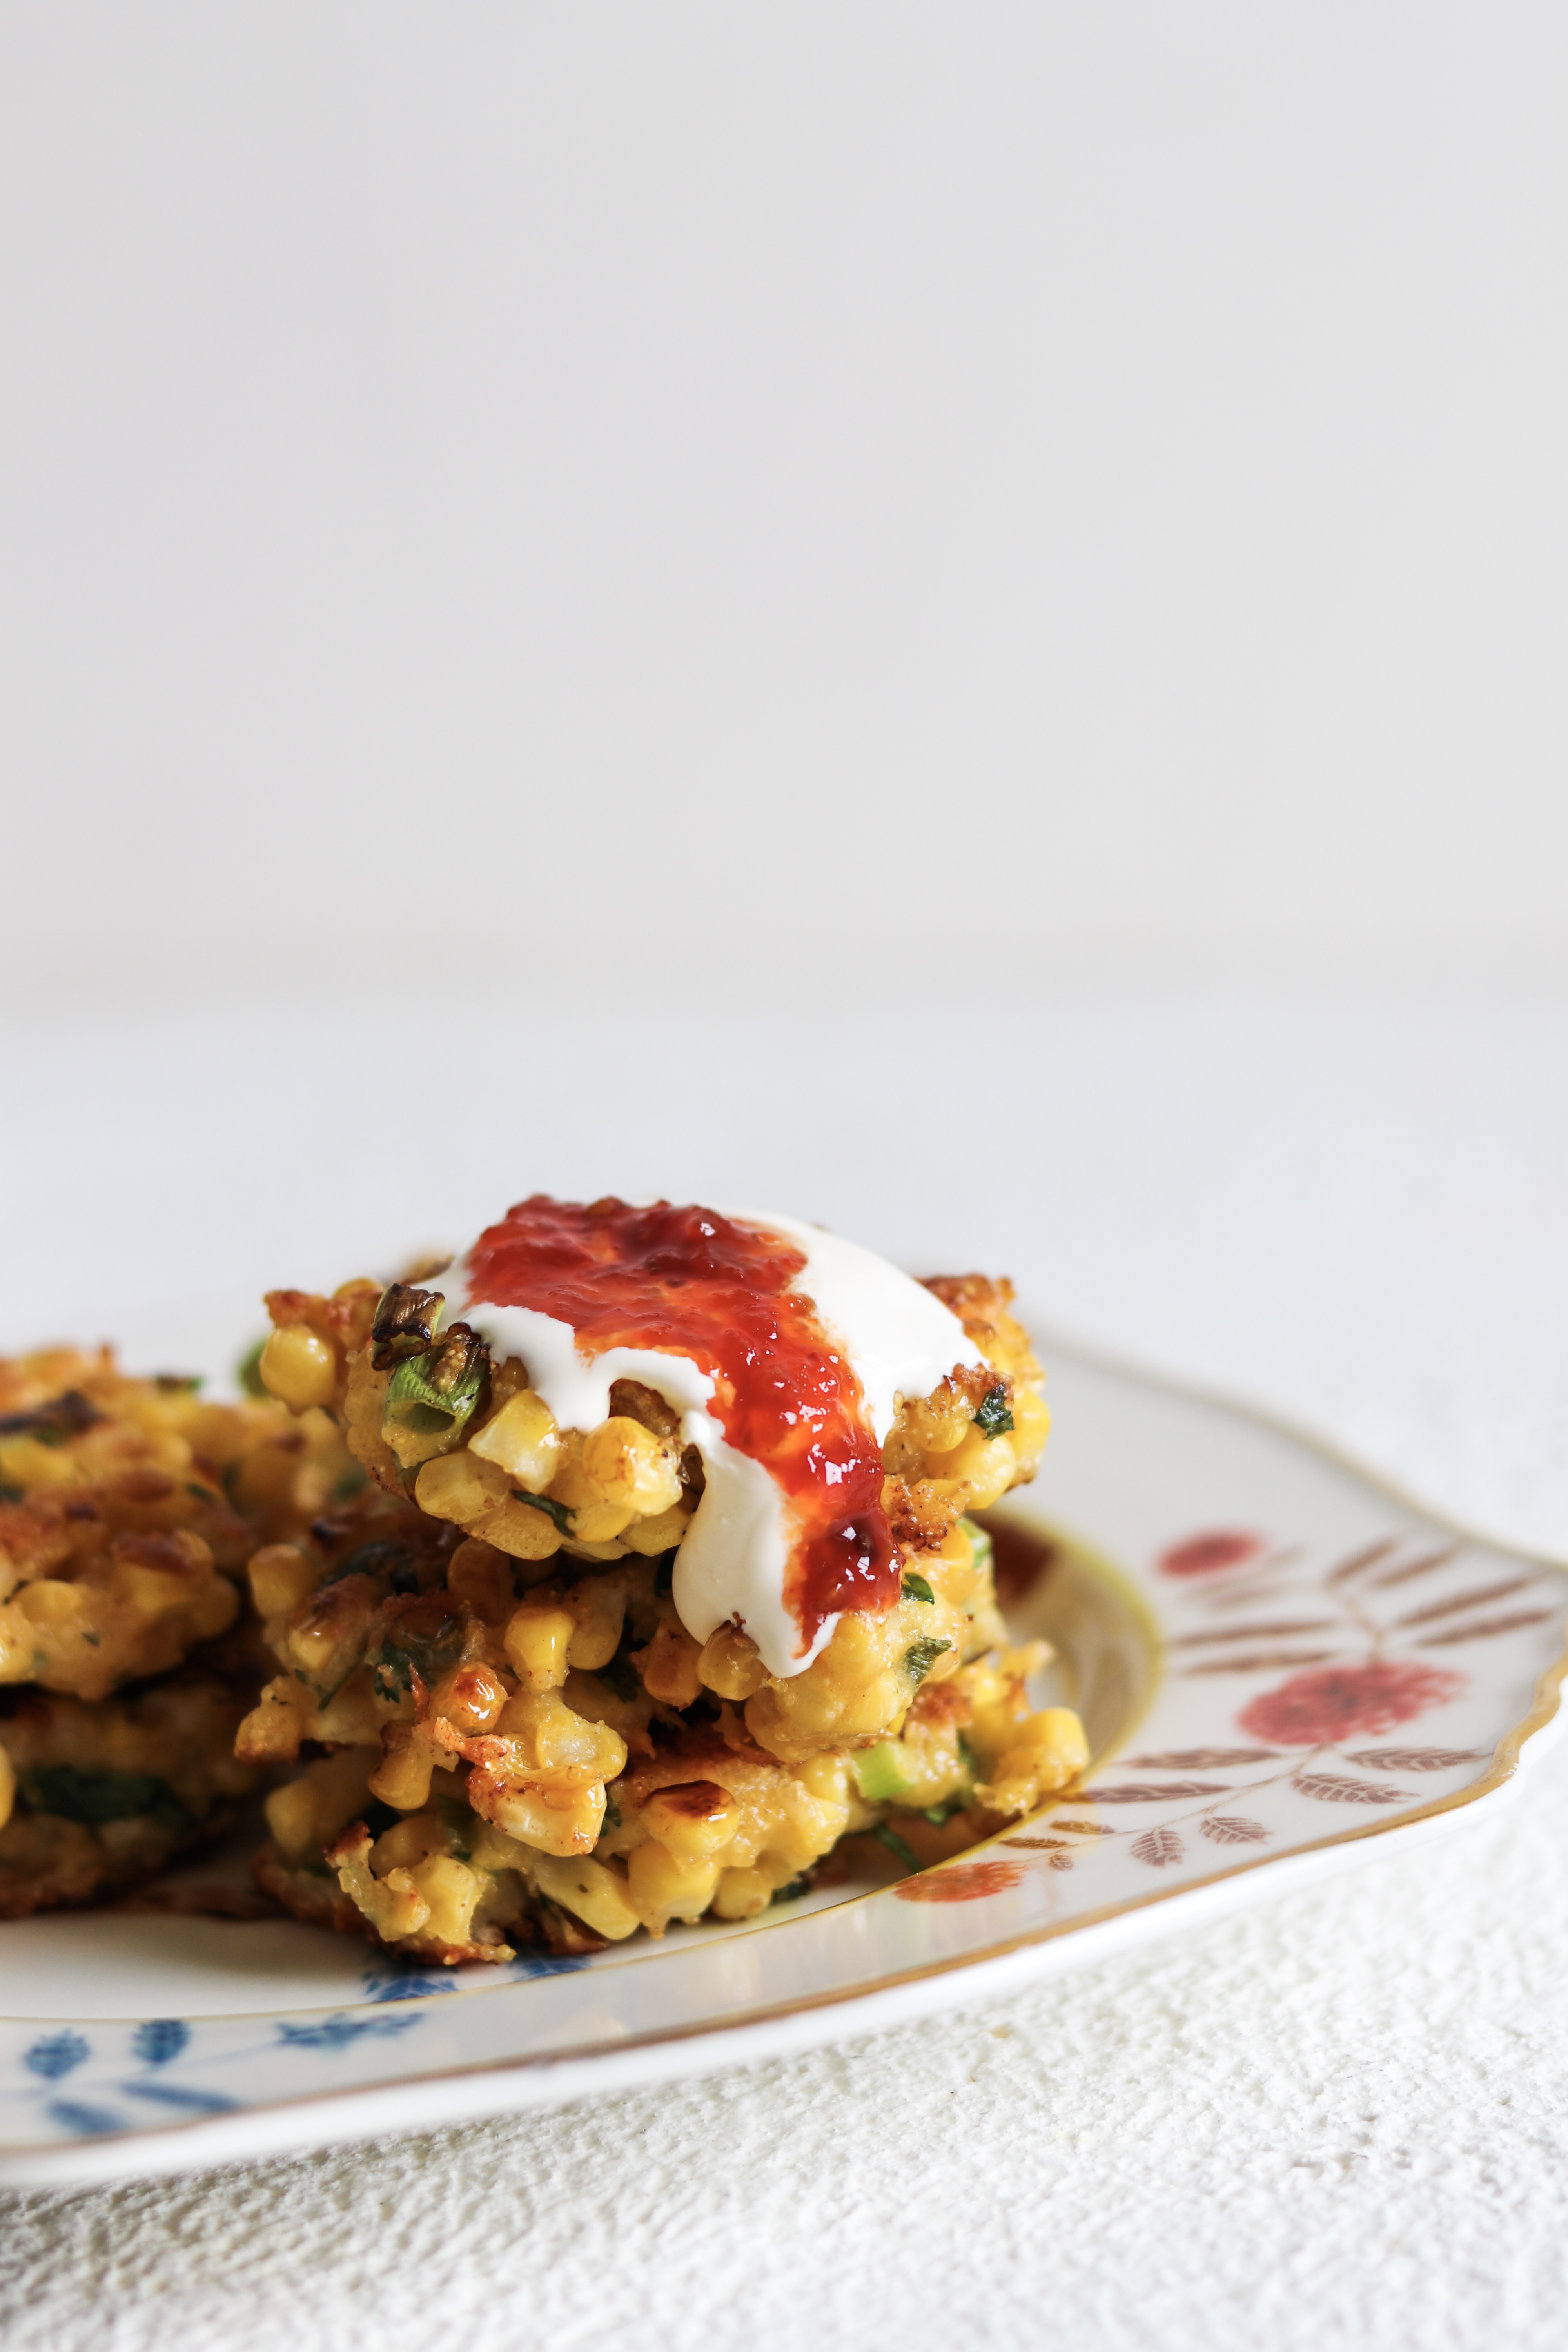 Corn Fritters With Cheese | Family-Friendly Recipes